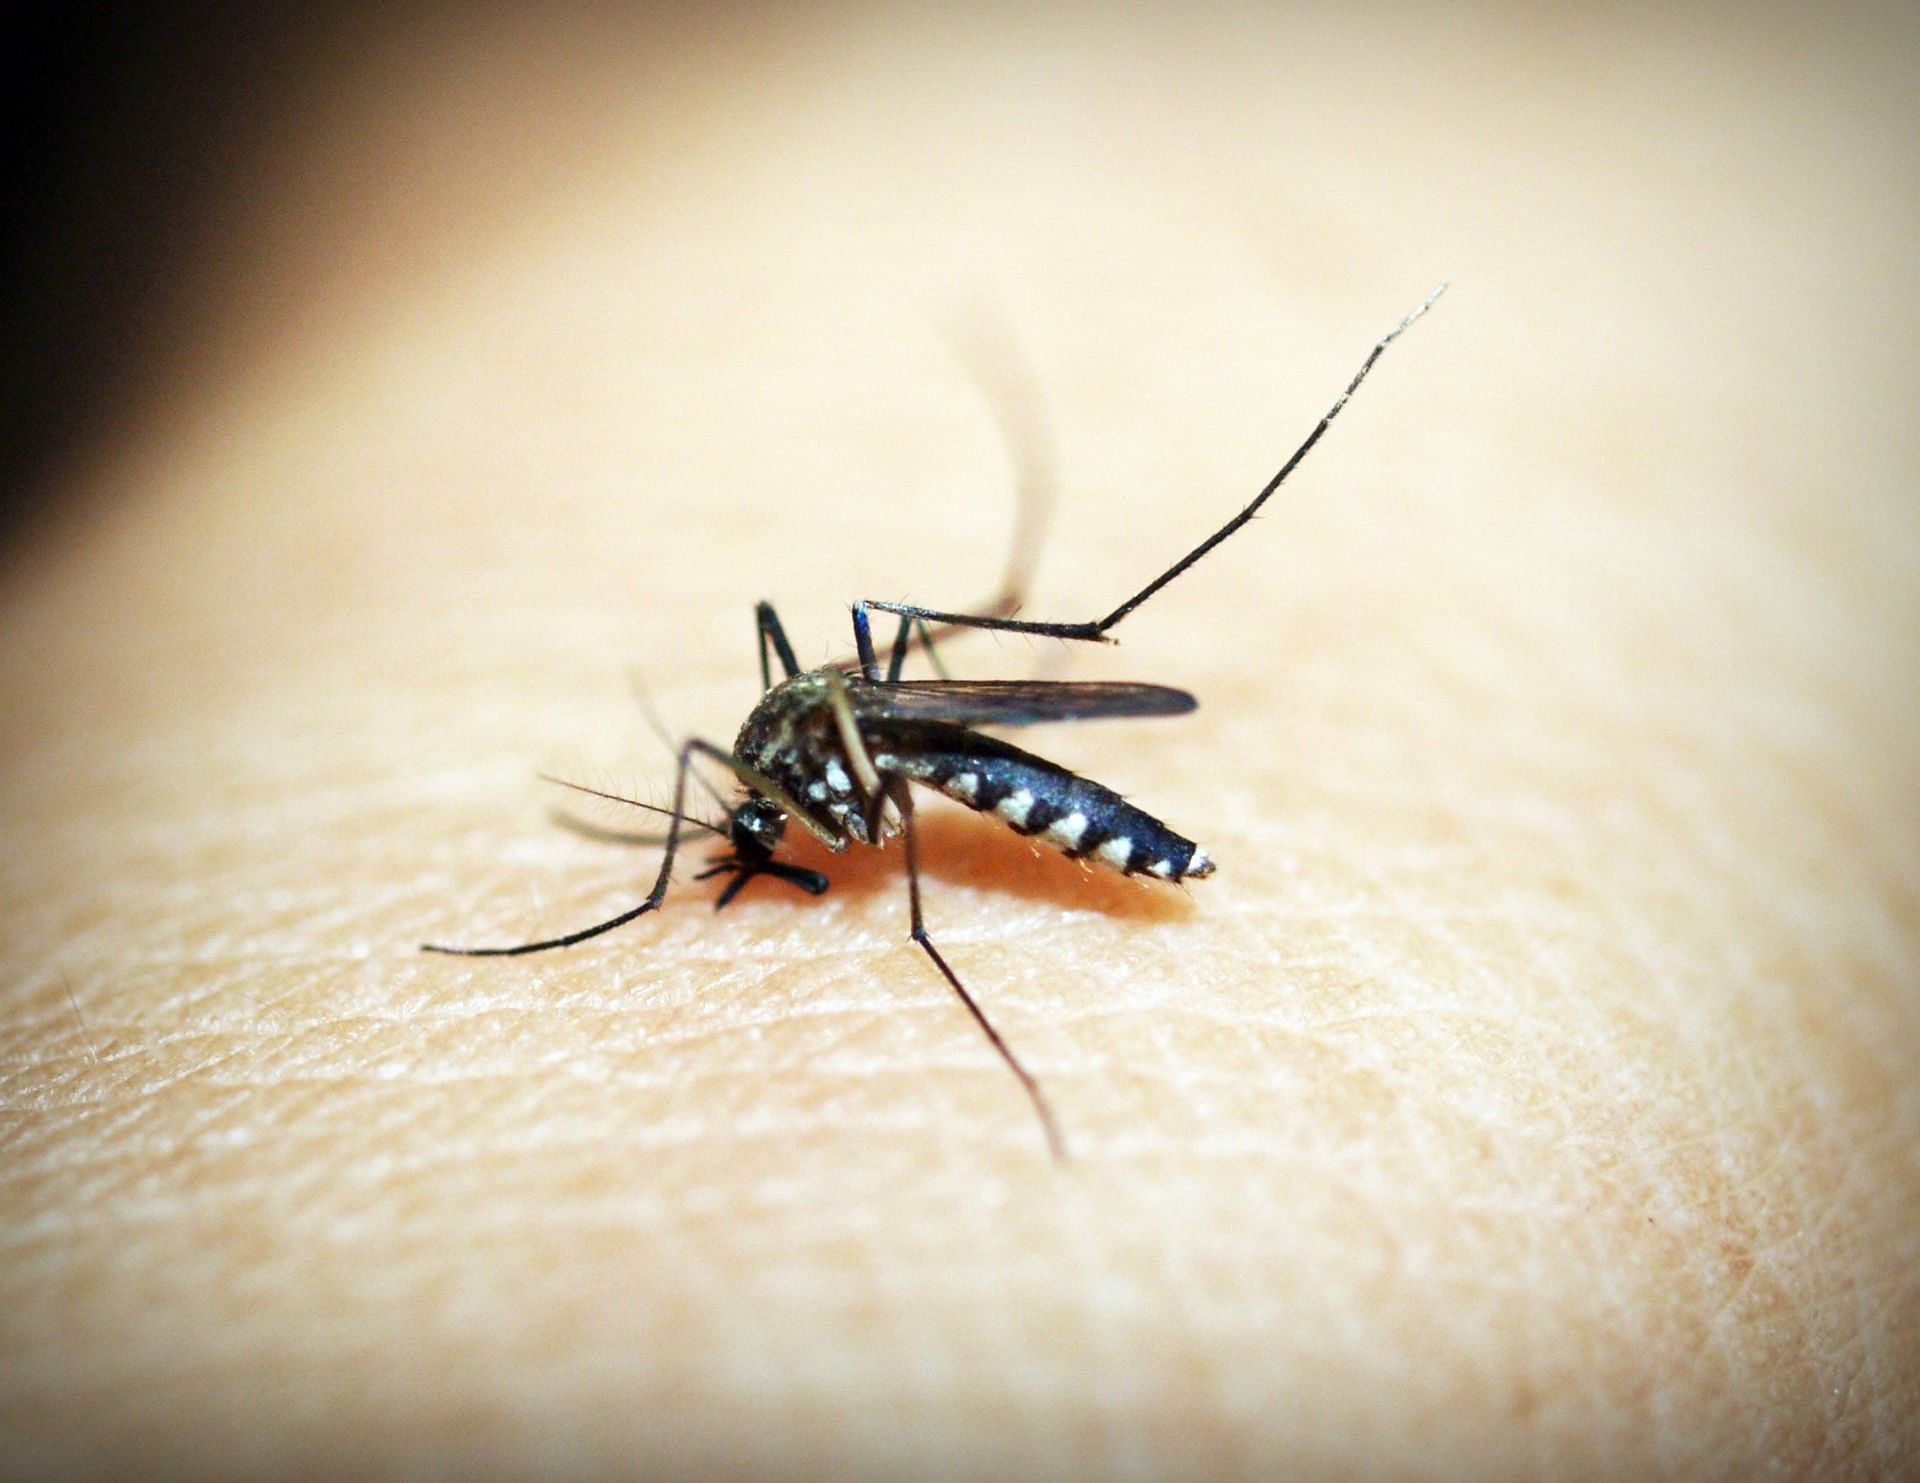 A mosquito bite may last for few days. (Image via Pexels/Iconcom)